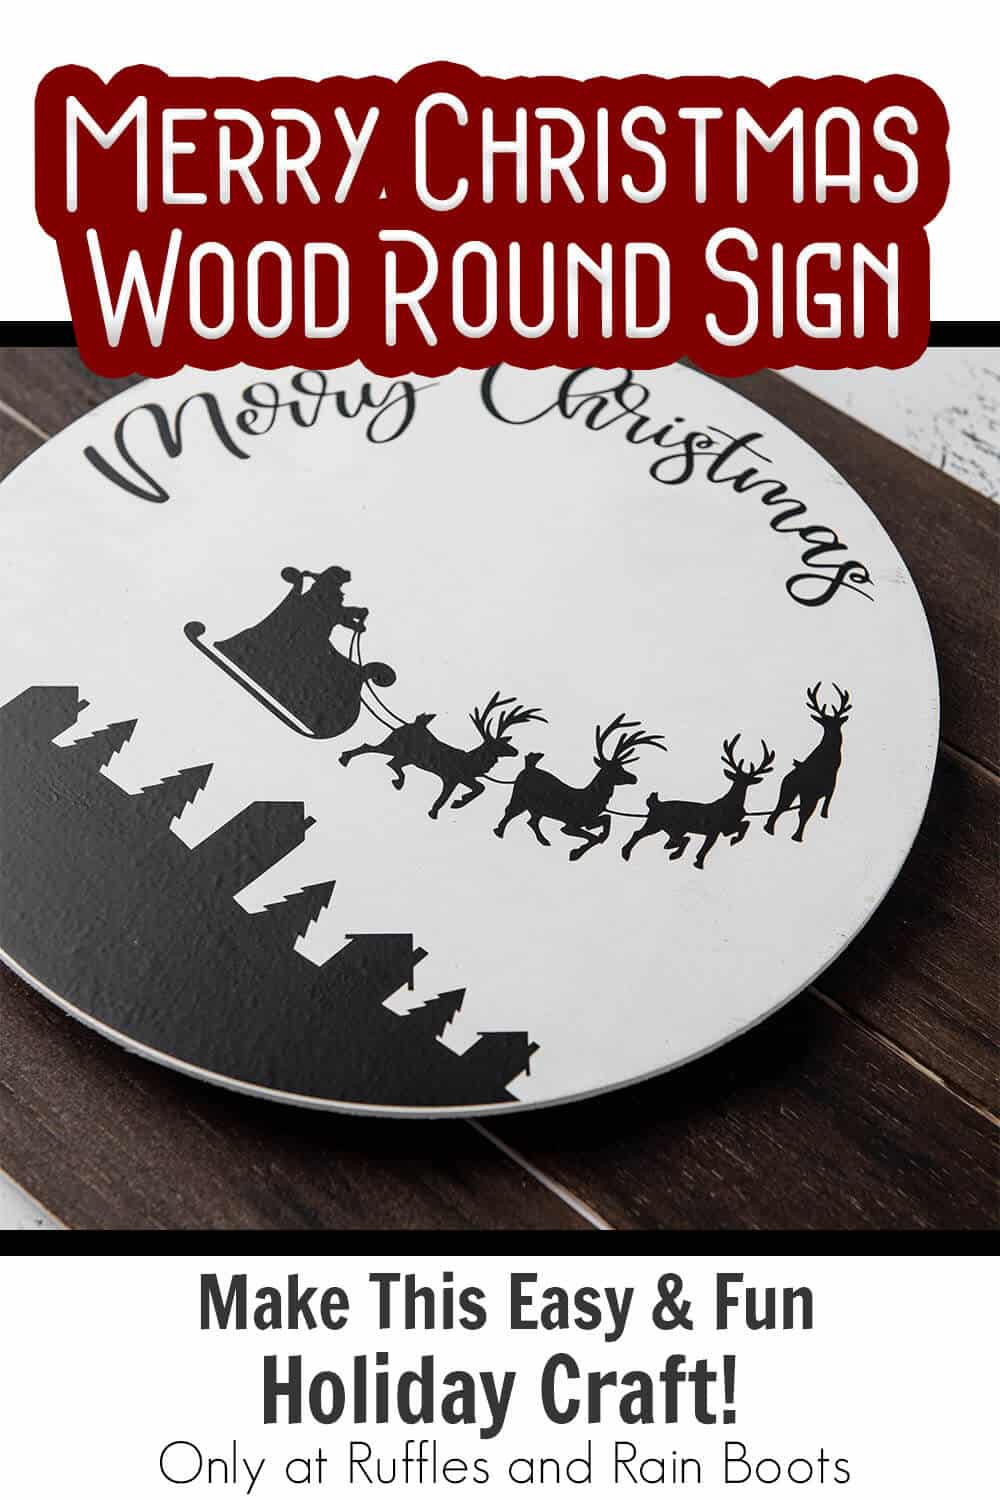 santa sleigh wood round sign with text which reads merry christmas wood round sign make this easy & fun holiday craft!